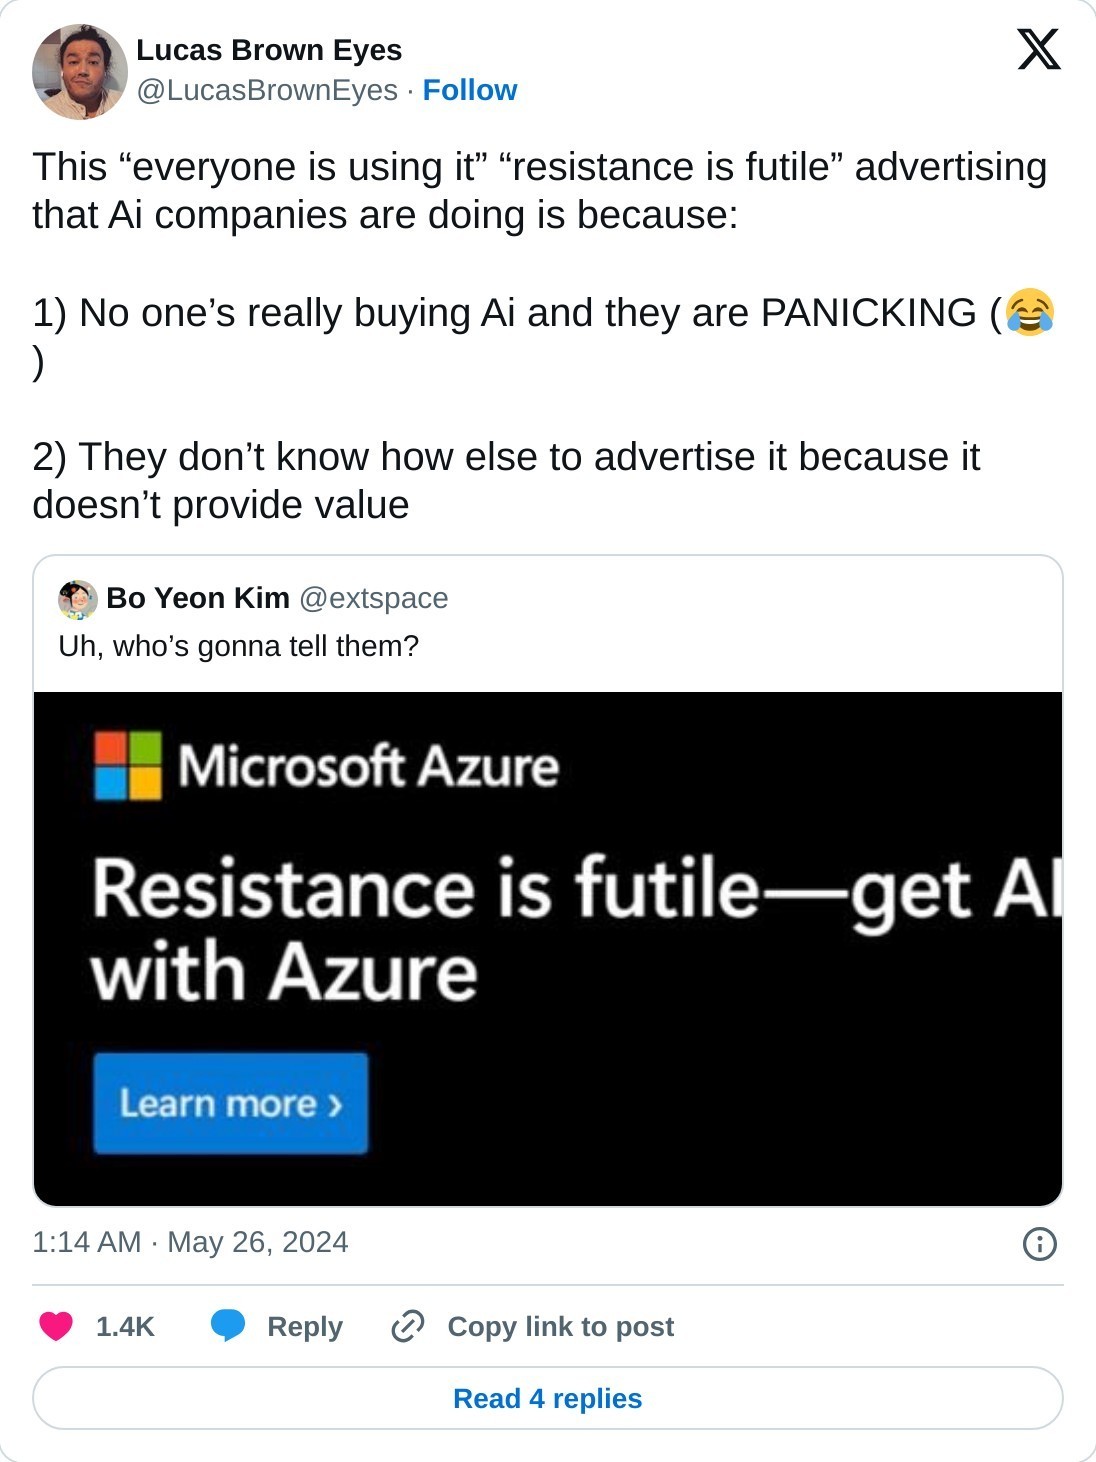 This “everyone is using it” “resistance is futile” advertising that Ai companies are doing is because:  1) No one’s really buying Ai and they are PANICKING (😂)  2) They don’t know how else to advertise it because it doesn’t provide value https://t.co/uXTXQT4IEn  — Lucas Brown Eyes (@LucasBrownEyes) May 26, 2024